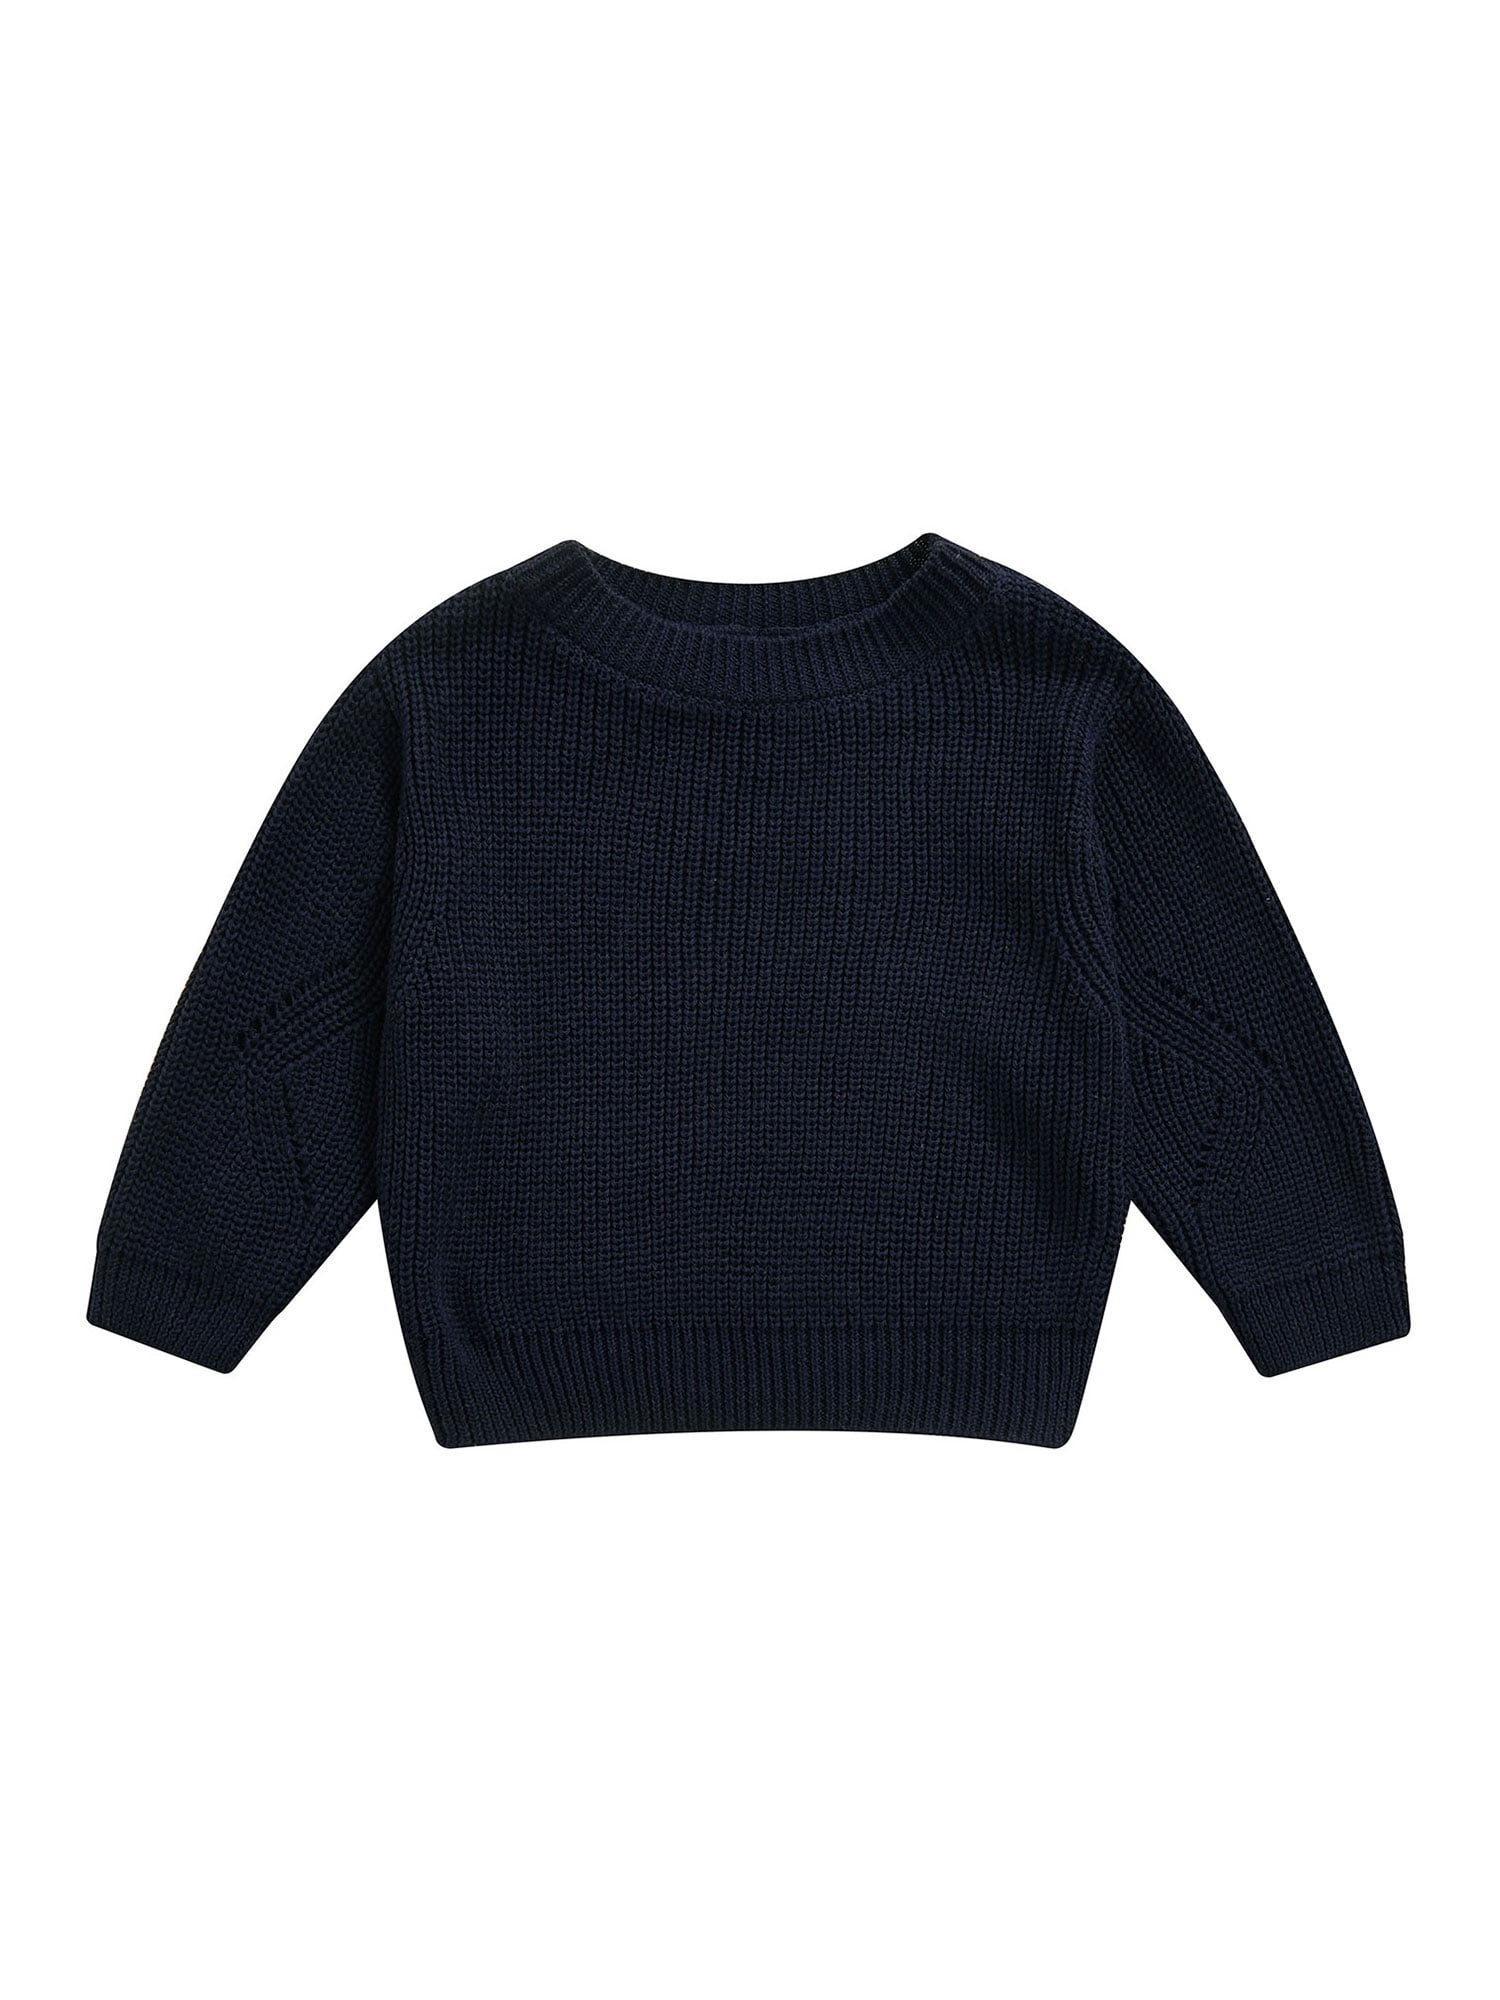 Infant Toddler Baby Girl Boy Knit Sweater Long Sleeve Blouse Solid Pullover Sweatshirt Warm Crewneck Tops